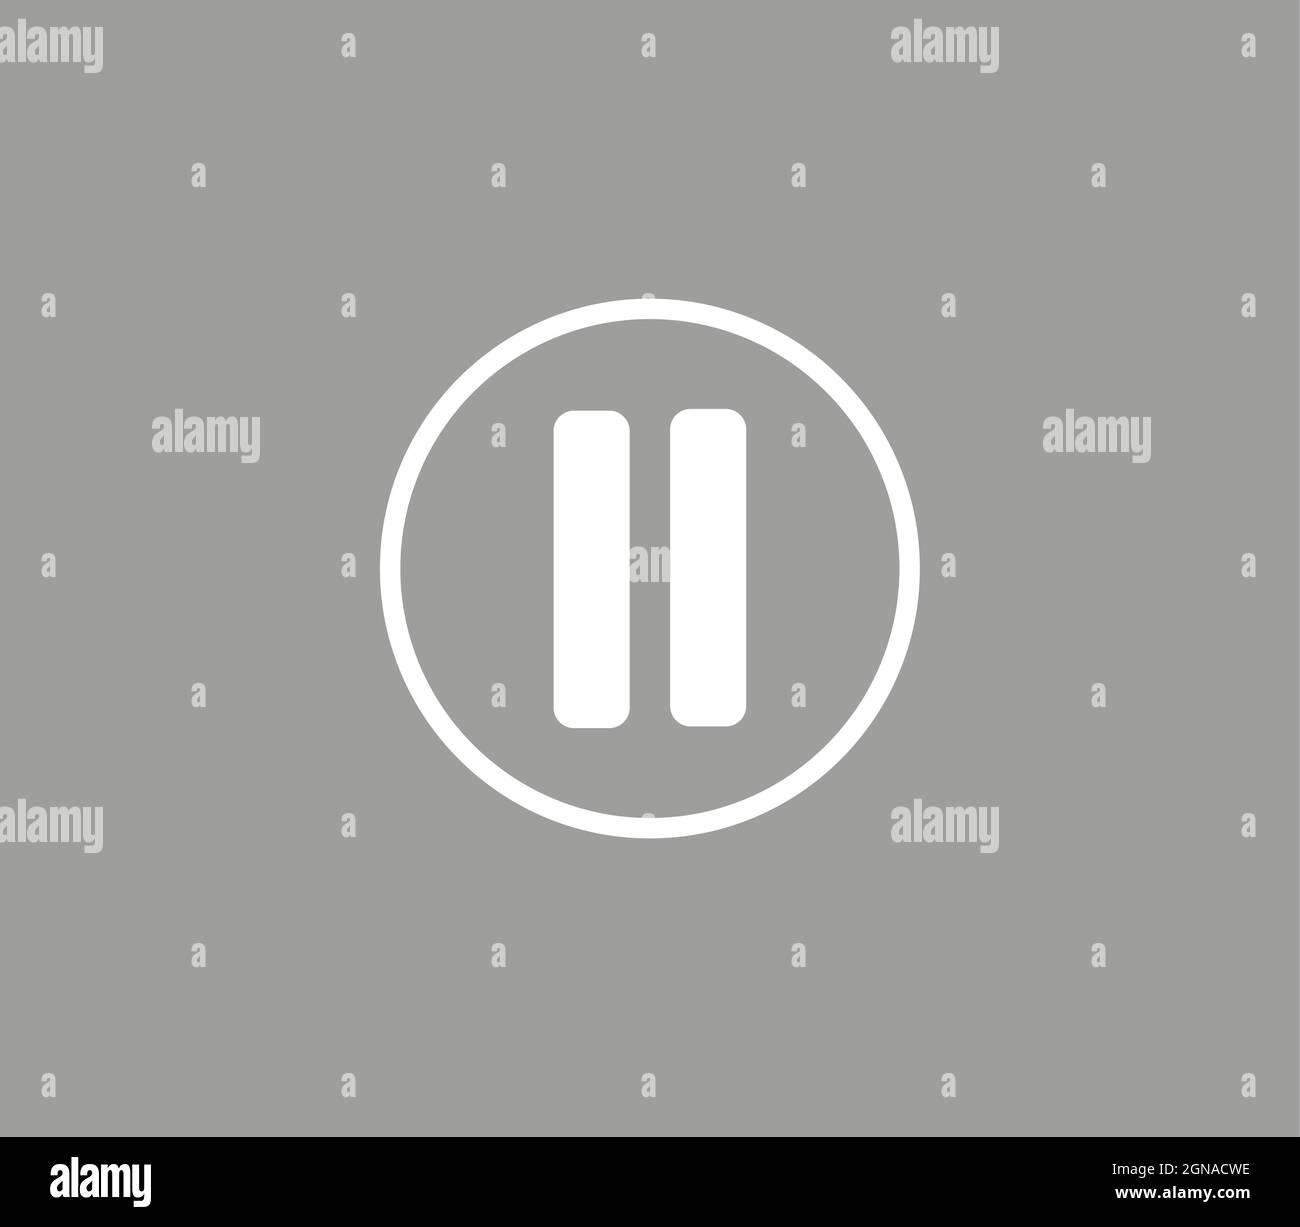 Pause button, music pause icon or song pause symbol Stock Vector